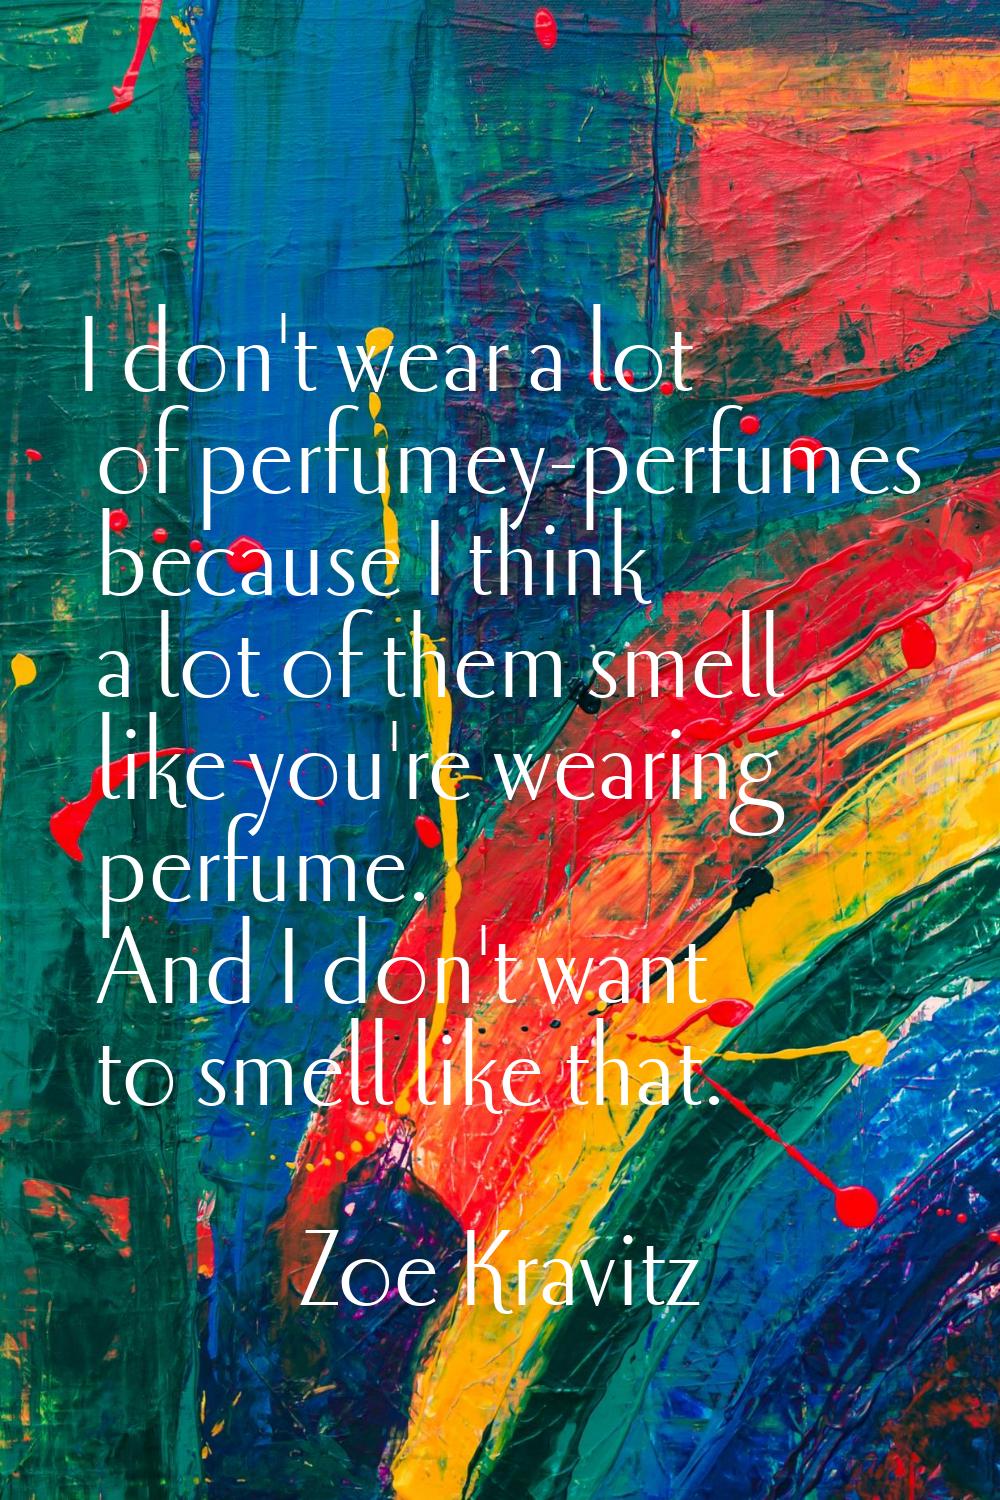 I don't wear a lot of perfumey-perfumes because I think a lot of them smell like you're wearing per